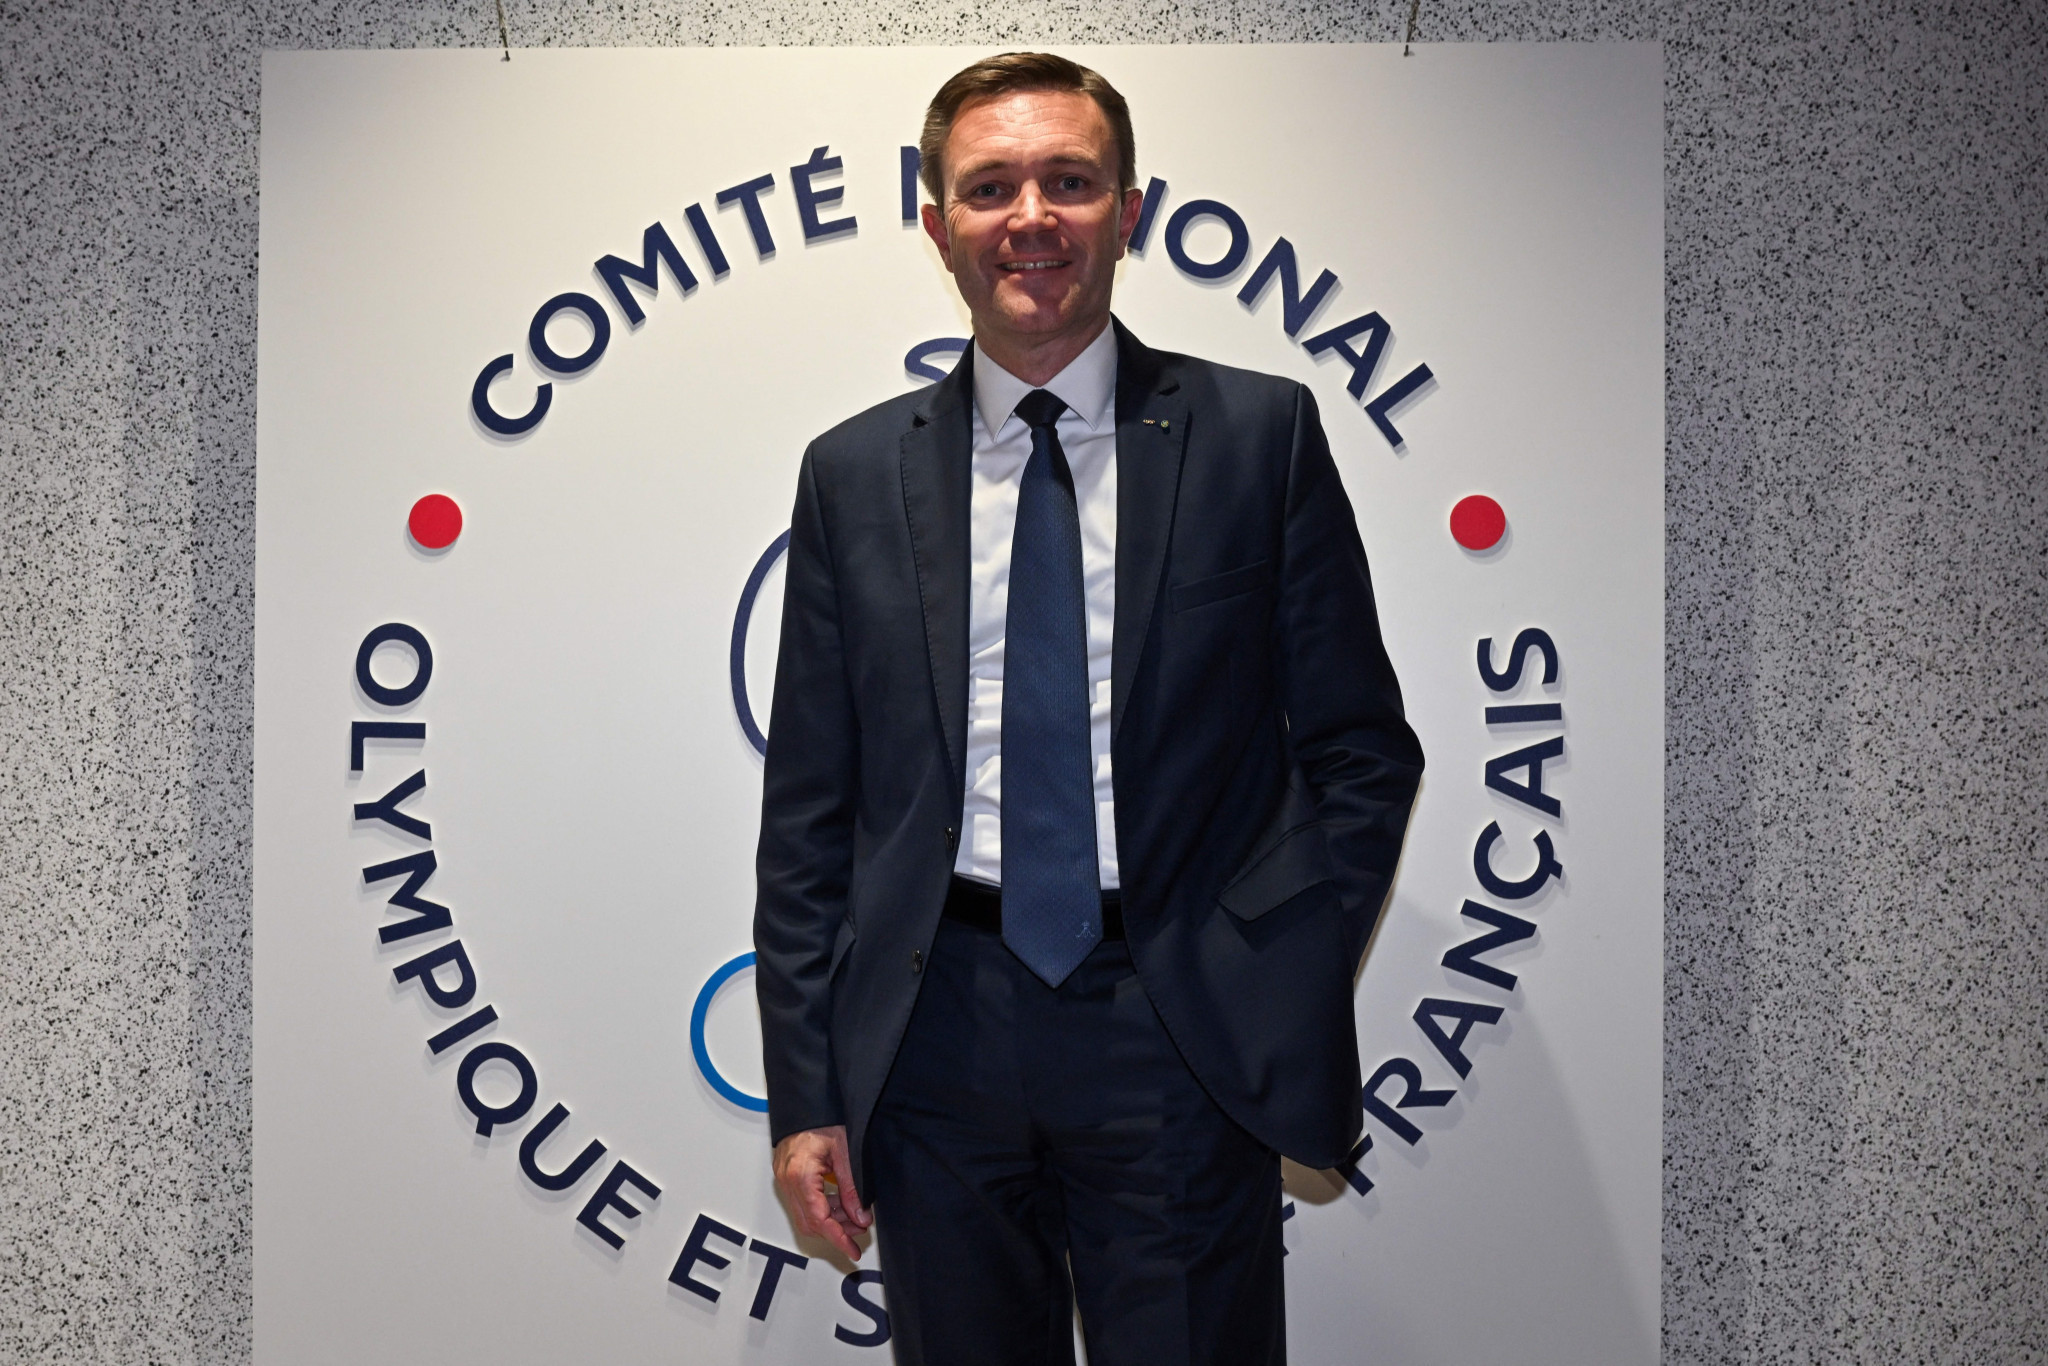 New CNOSF President David Lappartient requested the appointment of Arnaud Courtier ©Getty Images